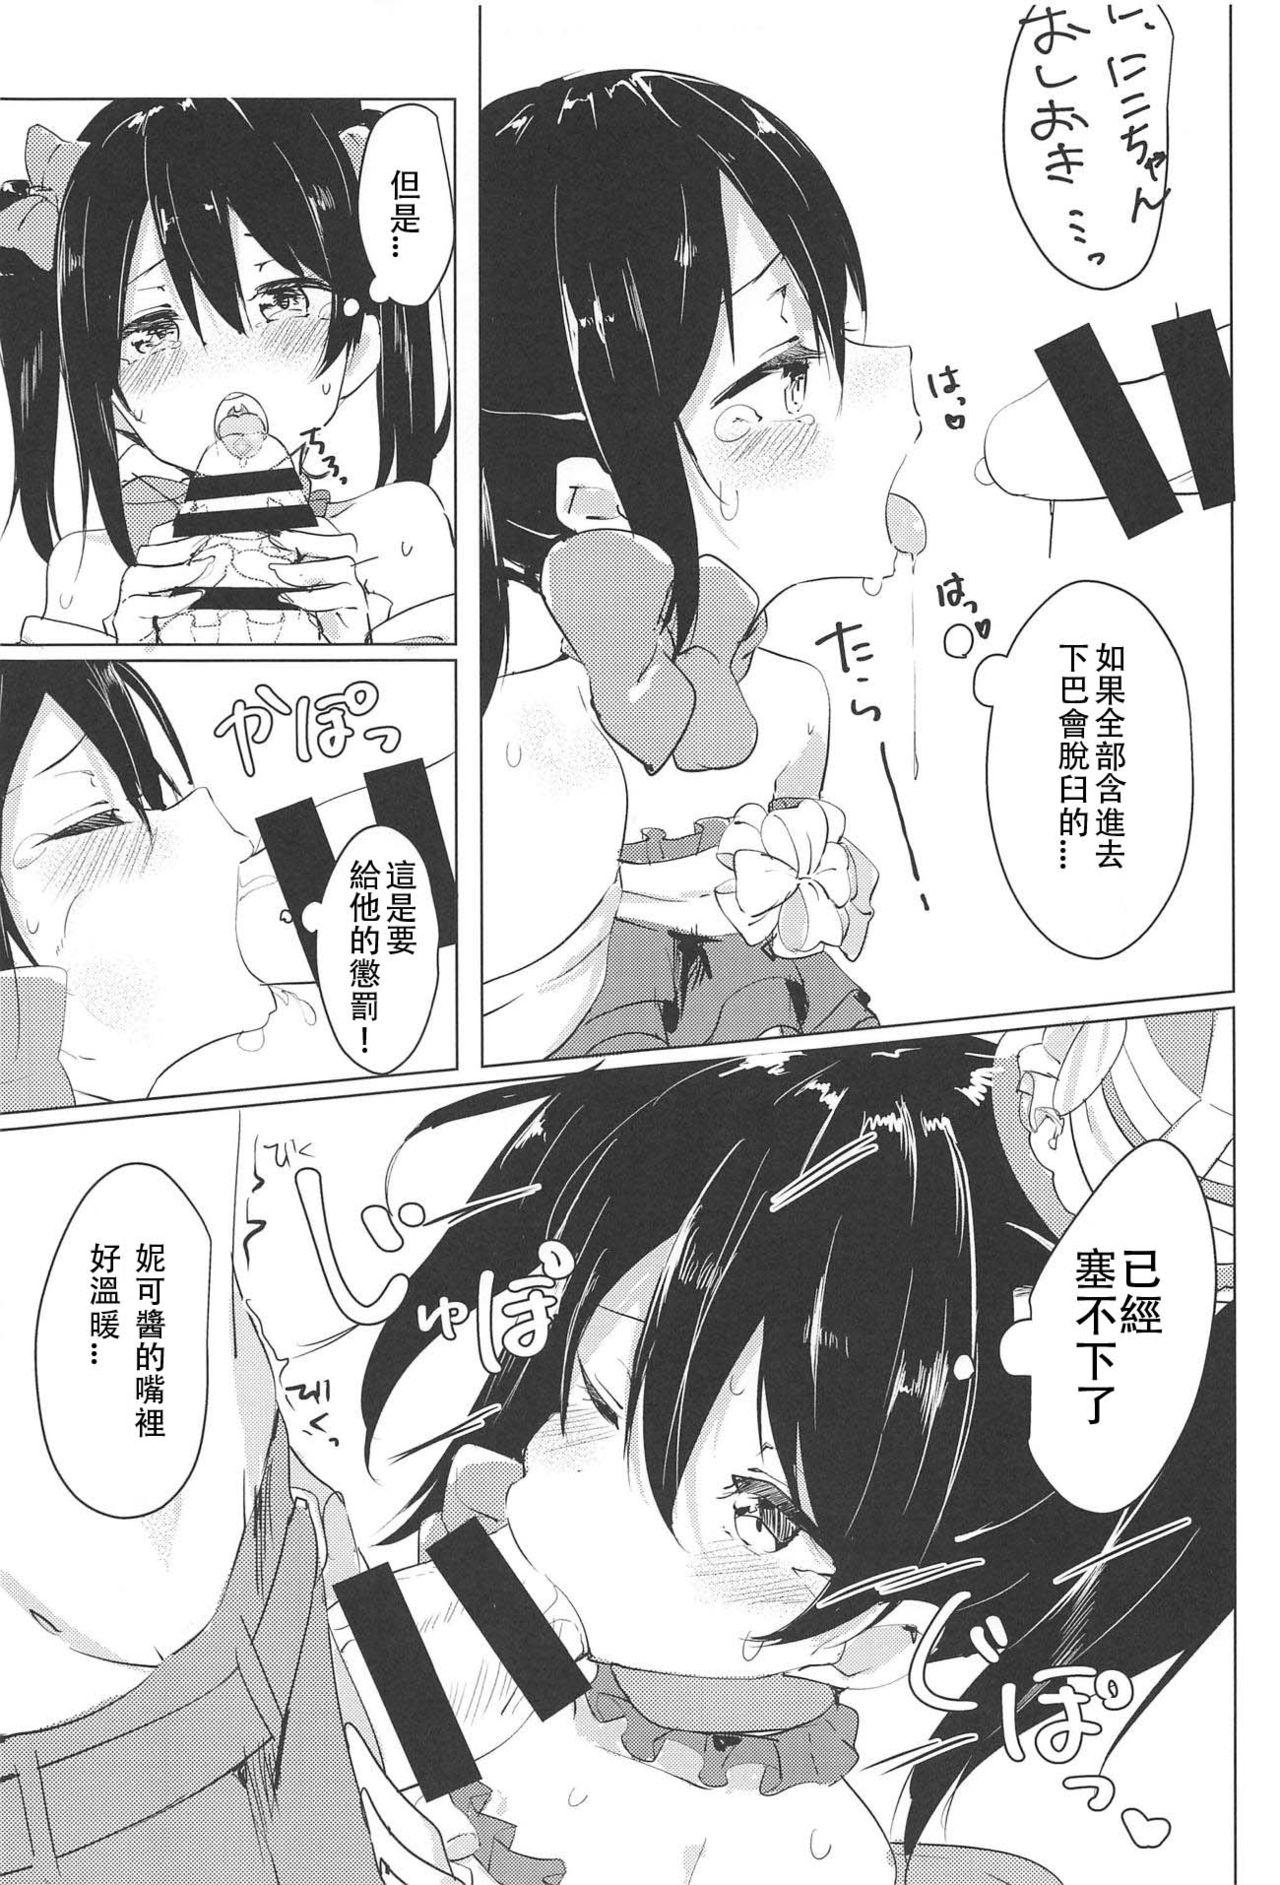 Scandal Smile for you. - Love live Gay Pawnshop - Page 13